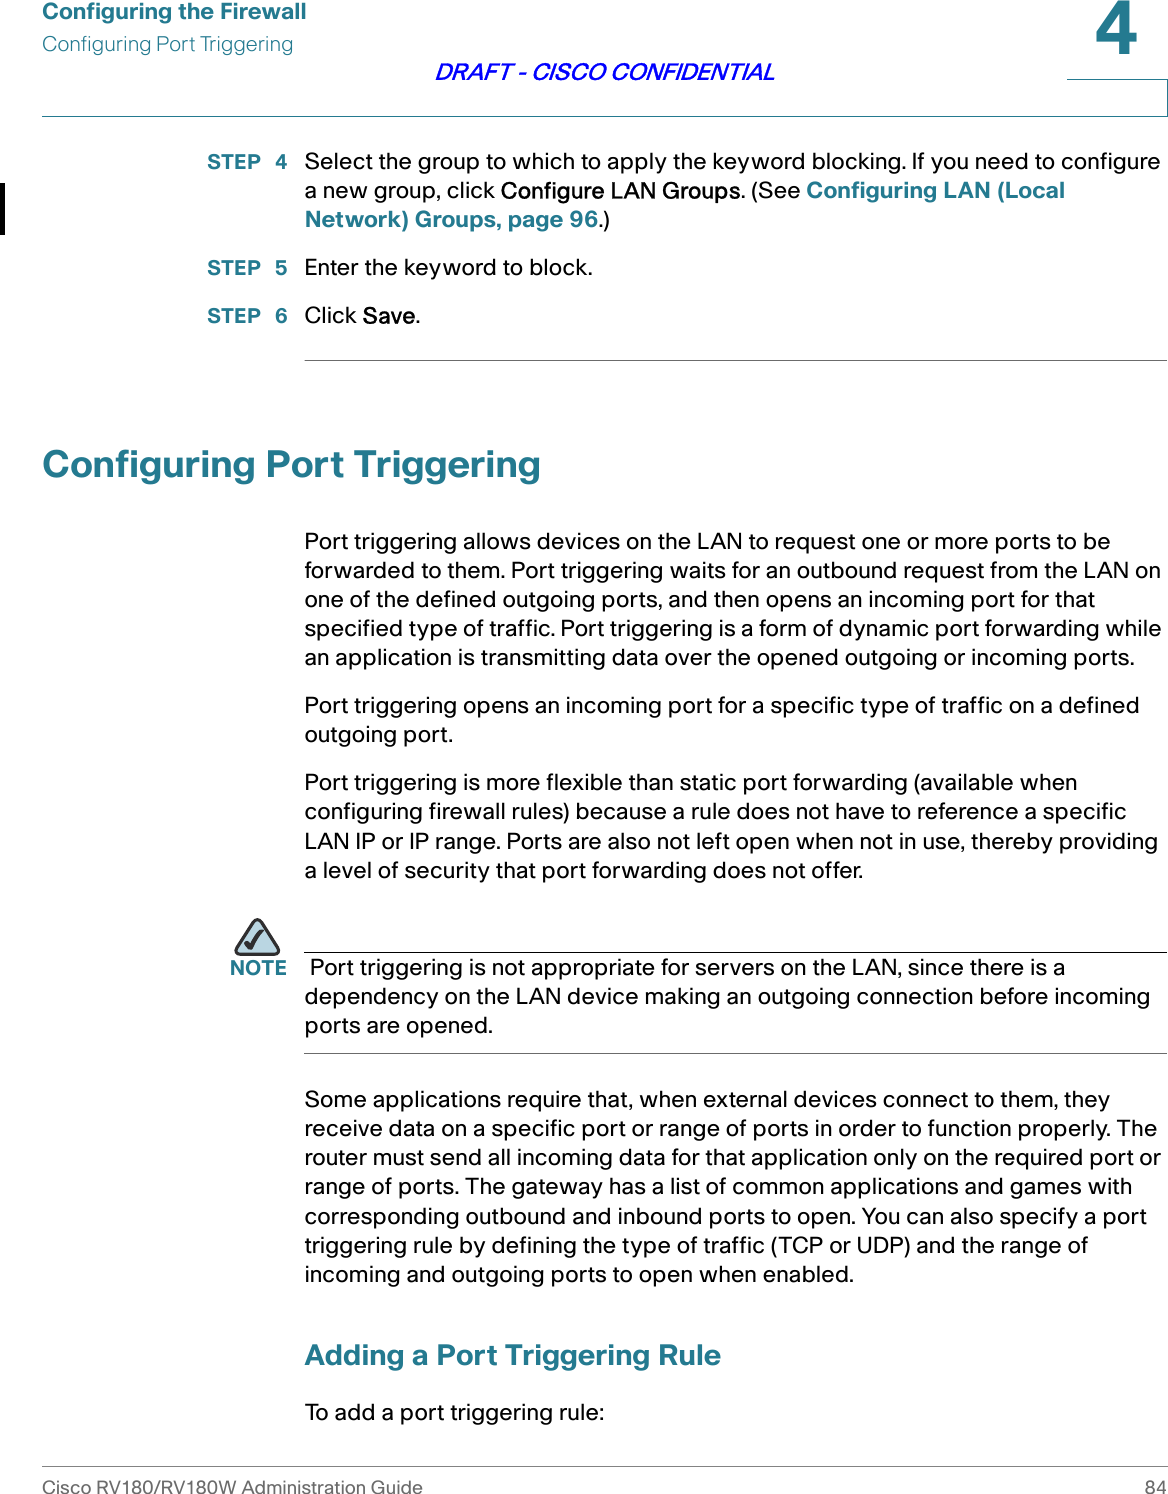 Configuring the FirewallConfiguring Port TriggeringCisco RV180/RV180W Administration Guide 844DRAFT - CISCO CONFIDENTIALSTEP  4 Select the group to which to apply the keyword blocking. If you need to configure a new group, click Configure LAN Groups. (See Configuring LAN (Local Network) Groups, page 96.)STEP  5 Enter the keyword to block.STEP  6 Click Save.Configuring Port TriggeringPort triggering allows devices on the LAN to request one or more ports to be forwarded to them. Port triggering waits for an outbound request from the LAN on one of the defined outgoing ports, and then opens an incoming port for that specified type of traffic. Port triggering is a form of dynamic port forwarding while an application is transmitting data over the opened outgoing or incoming ports.Port triggering opens an incoming port for a specific type of traffic on a defined outgoing port. Port triggering is more flexible than static port forwarding (available when configuring firewall rules) because a rule does not have to reference a specific LAN IP or IP range. Ports are also not left open when not in use, thereby providing a level of security that port forwarding does not offer.   NOTE  Port triggering is not appropriate for servers on the LAN, since there is a dependency on the LAN device making an outgoing connection before incoming ports are opened. Some applications require that, when external devices connect to them, they receive data on a specific port or range of ports in order to function properly. The router must send all incoming data for that application only on the required port or range of ports. The gateway has a list of common applications and games with corresponding outbound and inbound ports to open. You can also specify a port triggering rule by defining the type of traffic (TCP or UDP) and the range of incoming and outgoing ports to open when enabled. Adding a Port Triggering RuleTo add a port triggering rule: